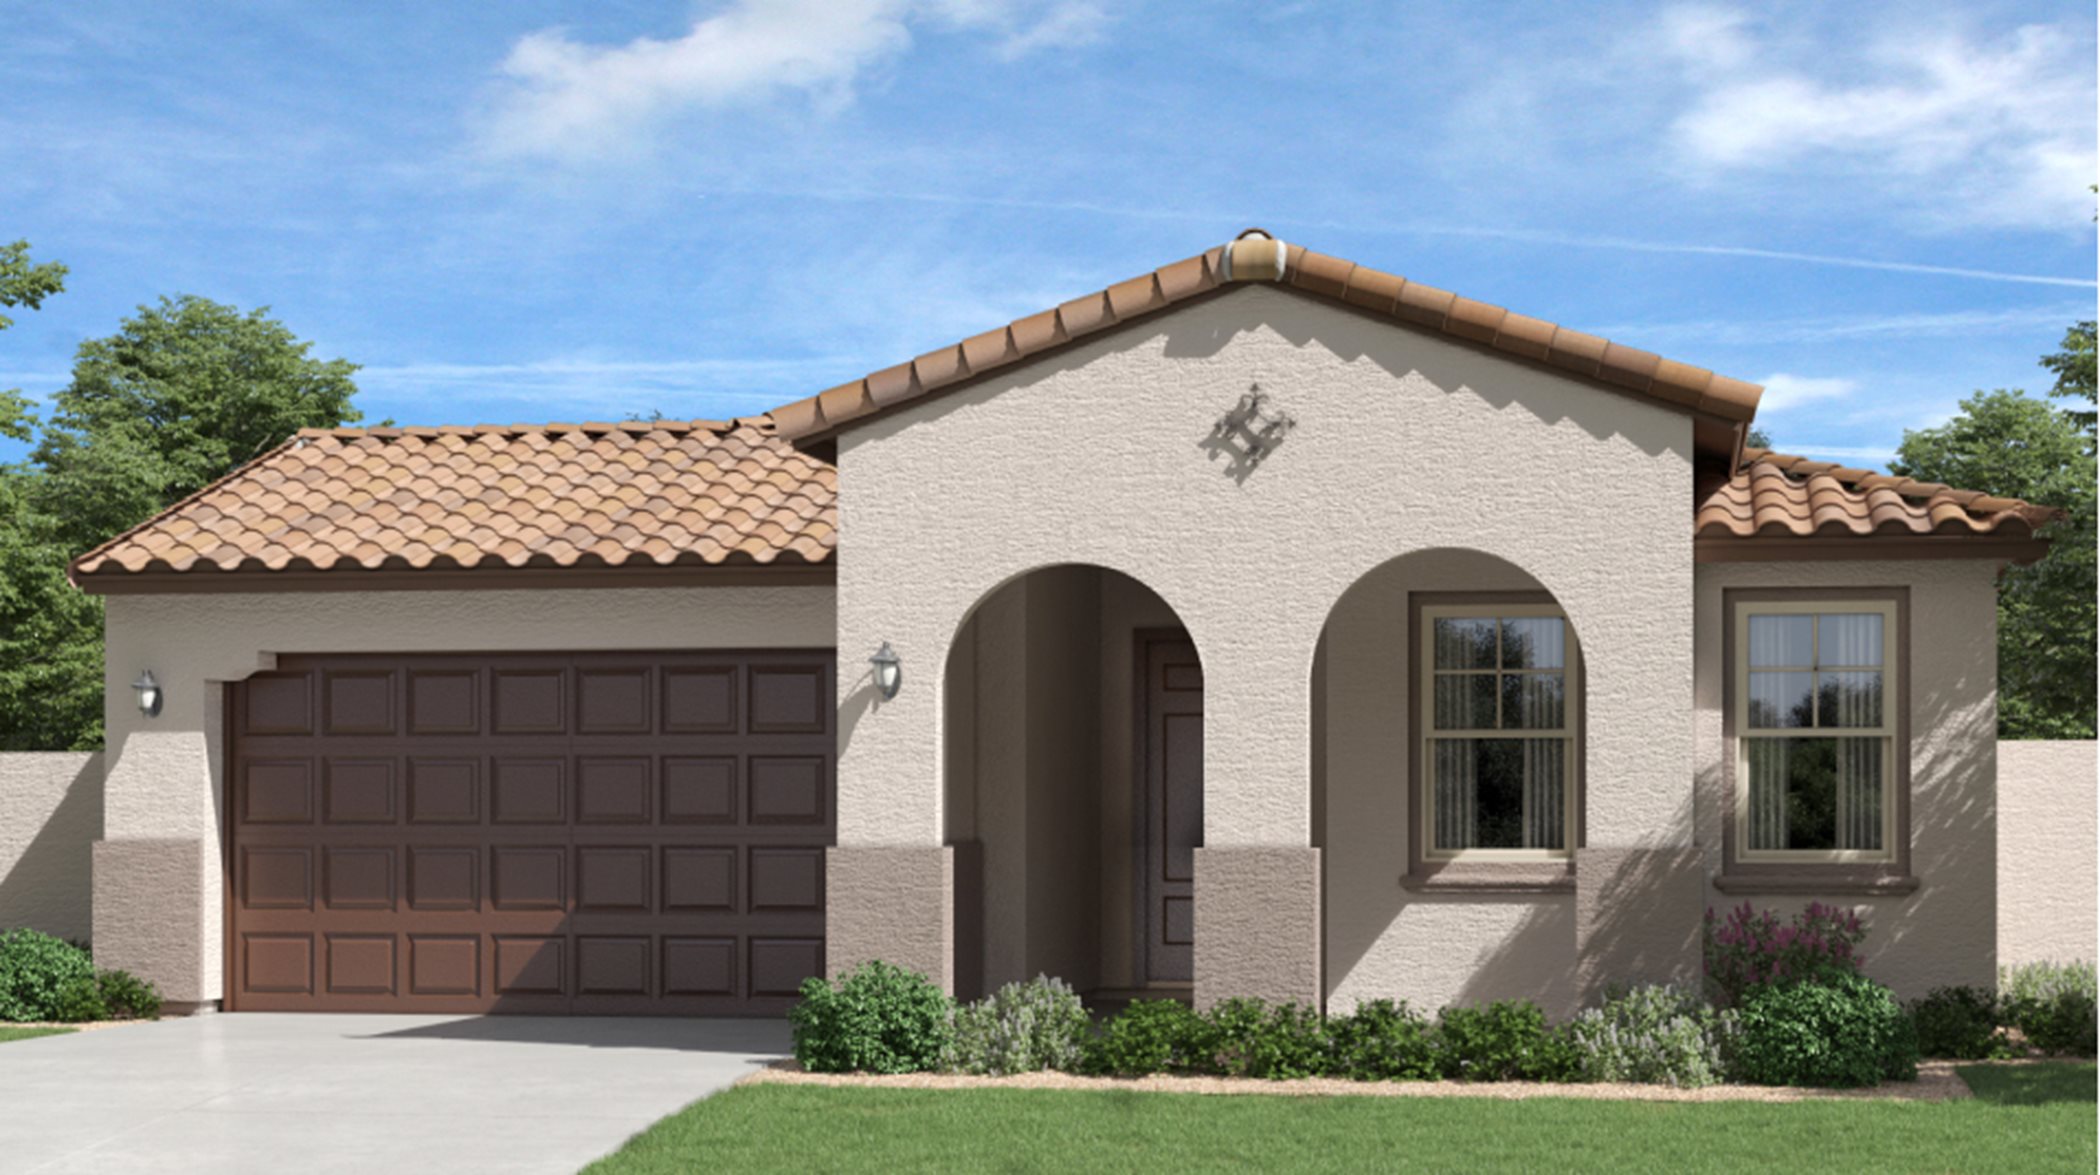 Spanish Colonial home rendering